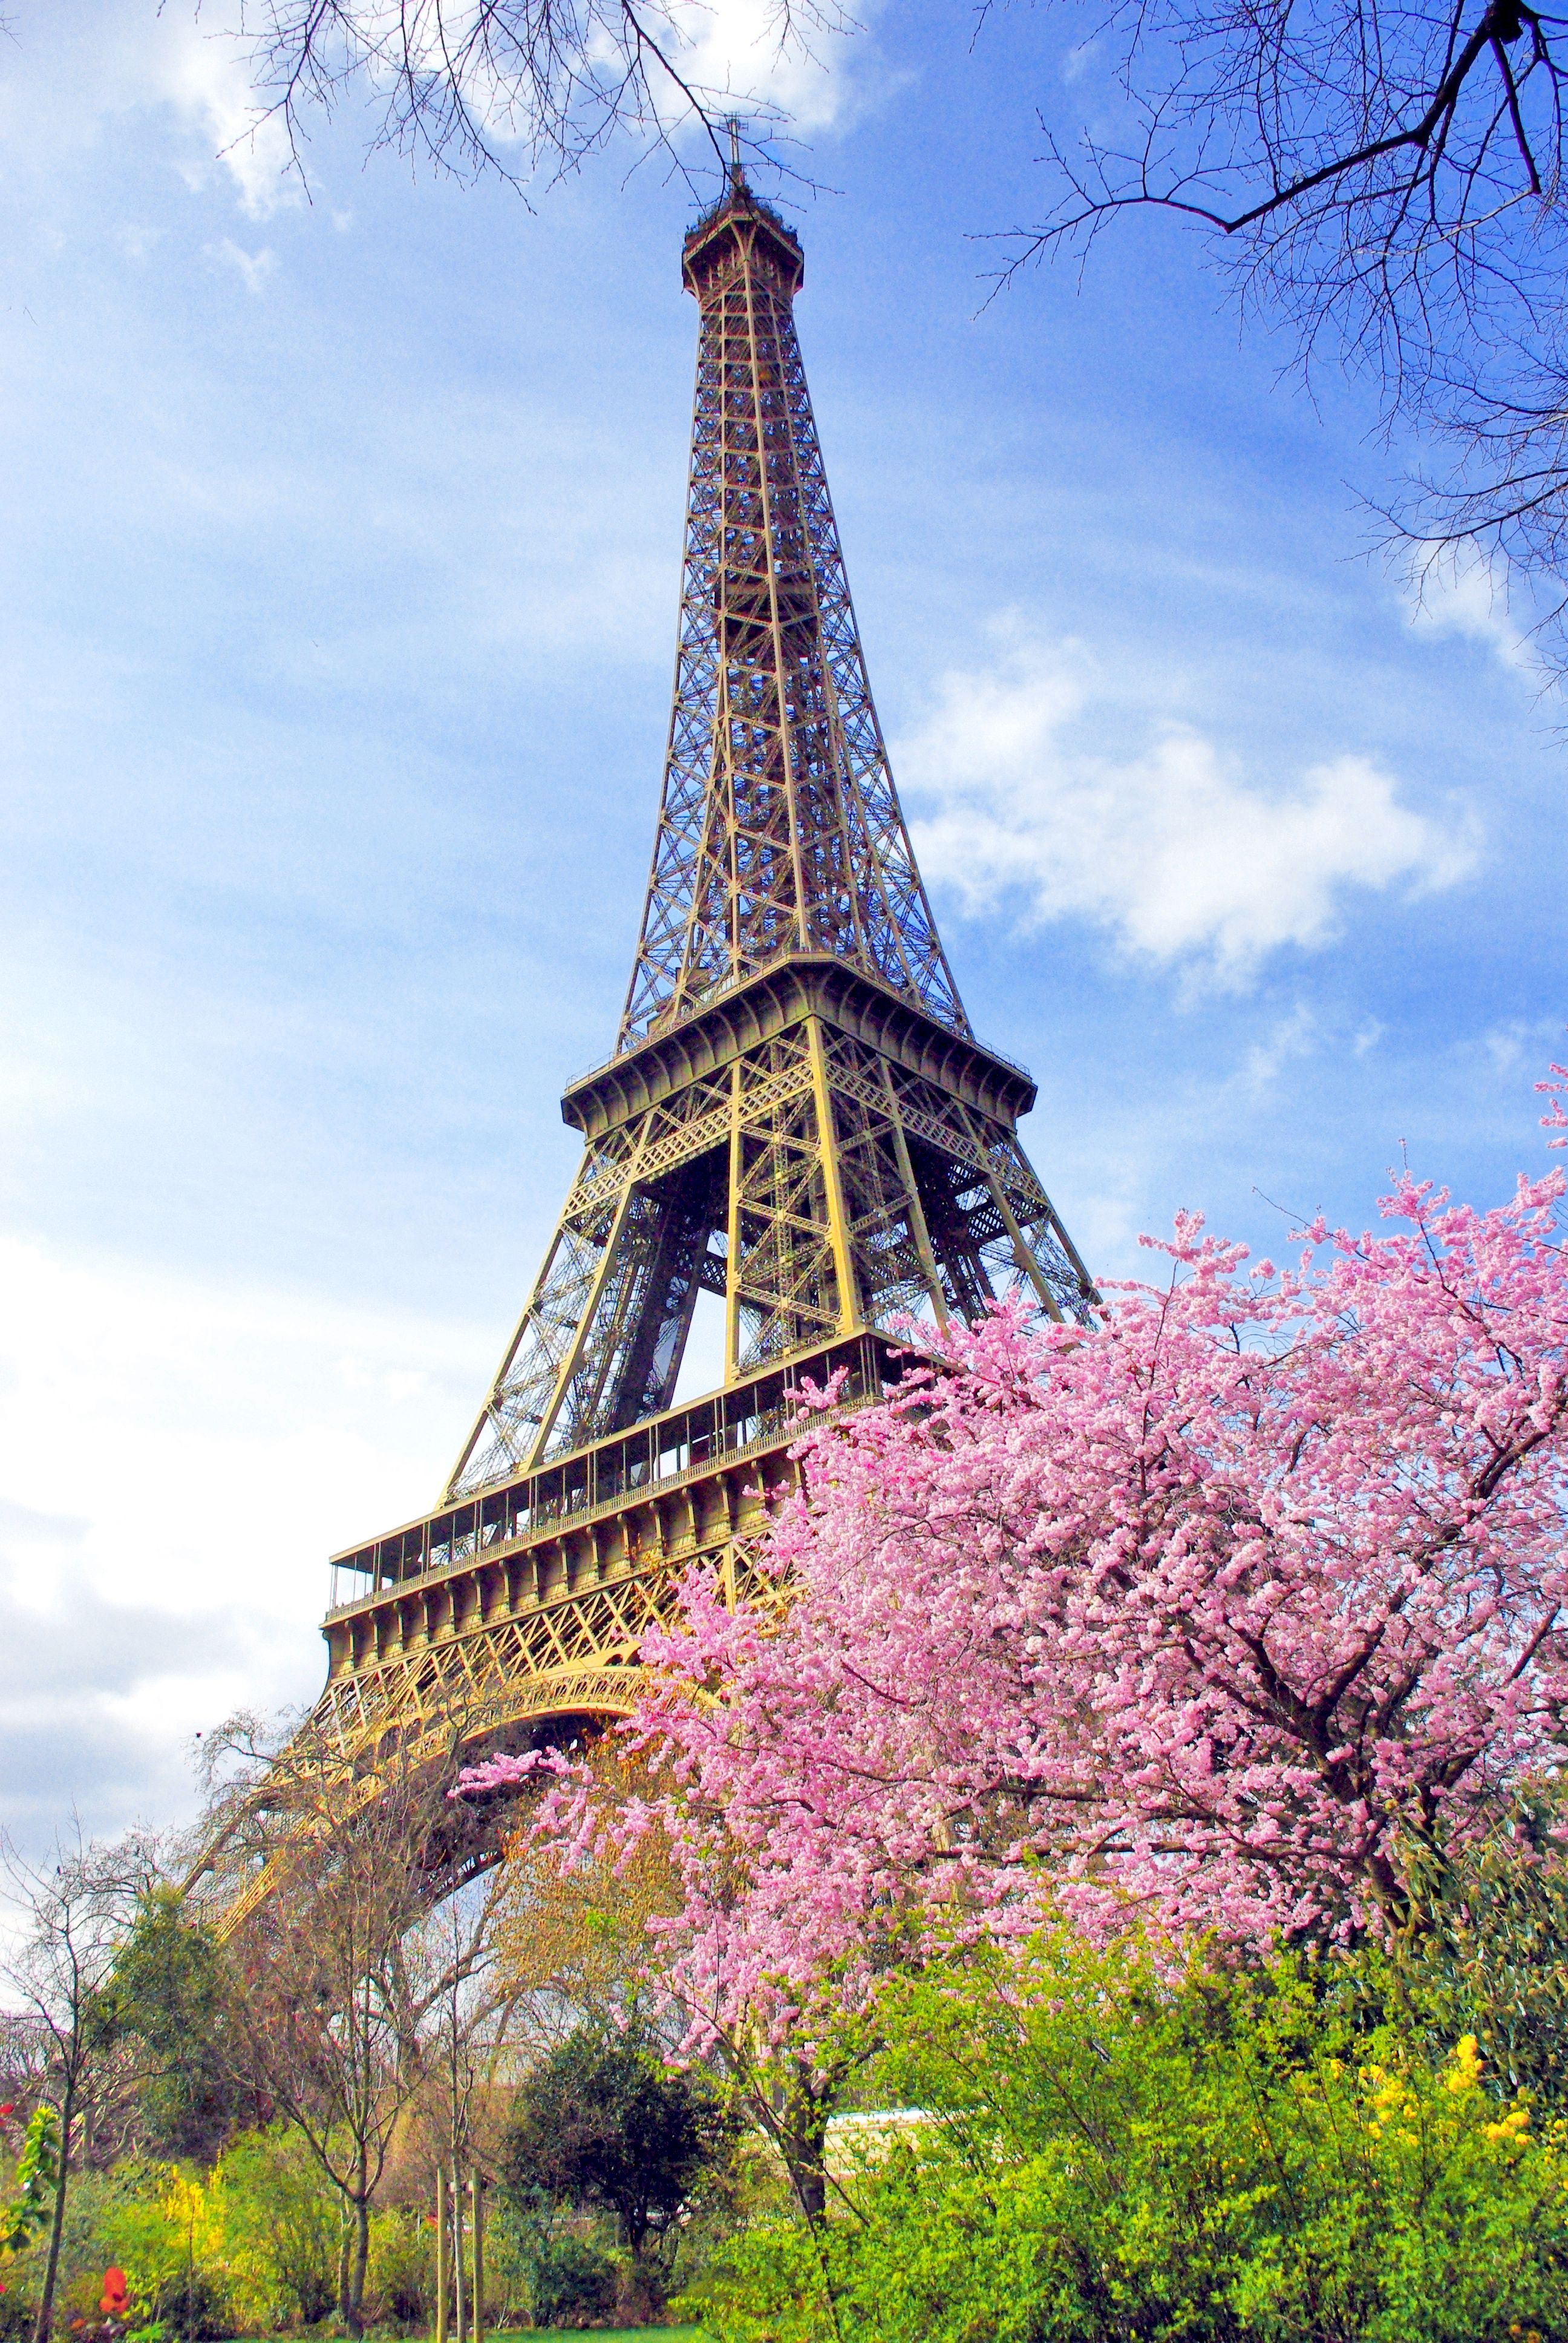 Paris in the Spring! By the Eiffel Tower. Get the New Online Discovery Course: The Secrets of the Eiffel Tower. Paris picture, Paris tour eiffel, Eiffel tower